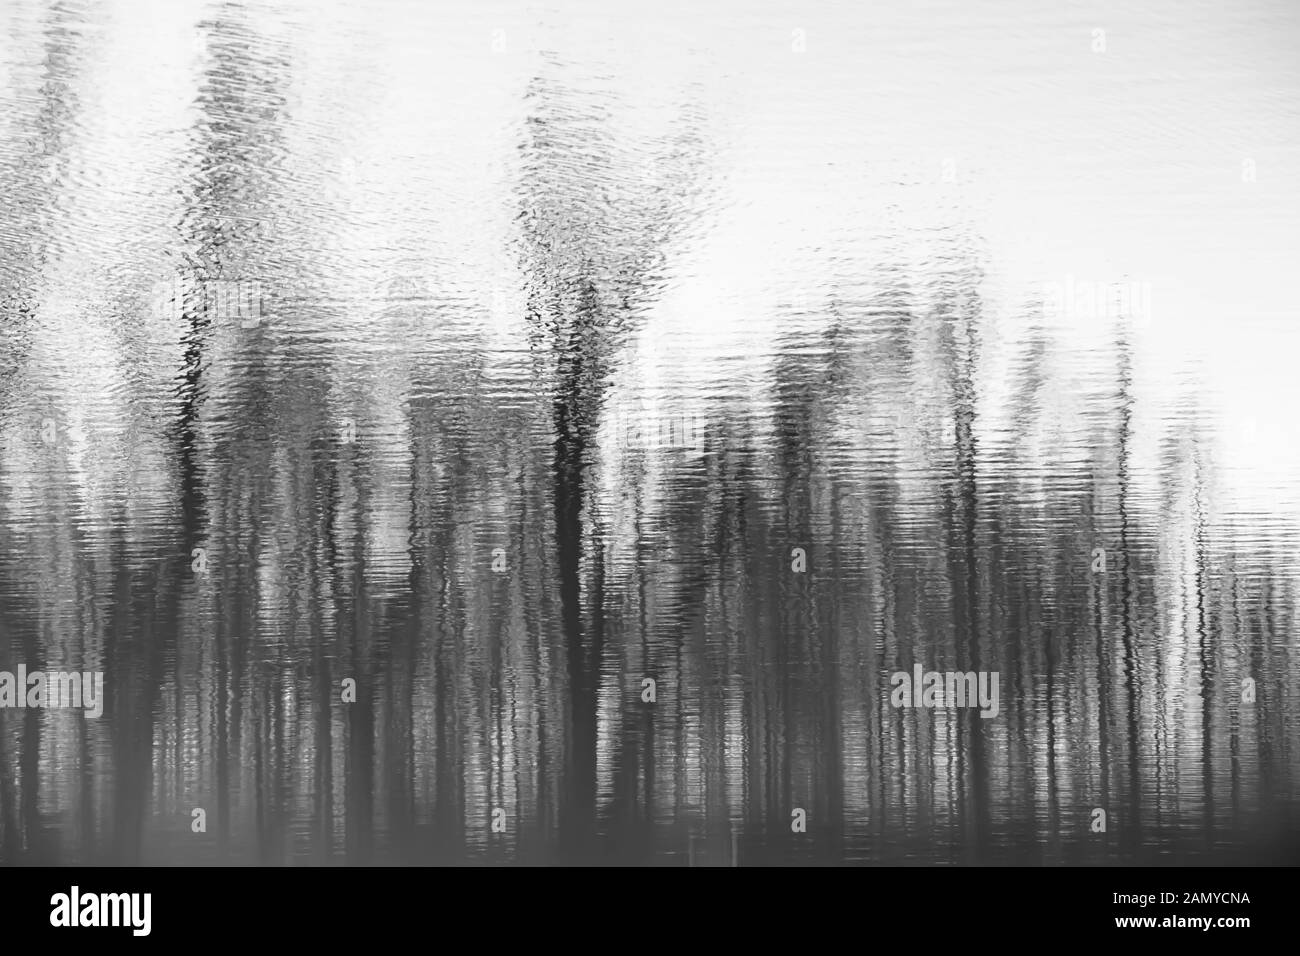 Abstract blurry dark river water reflection of the bare trees in a forest in black and white Stock Photo